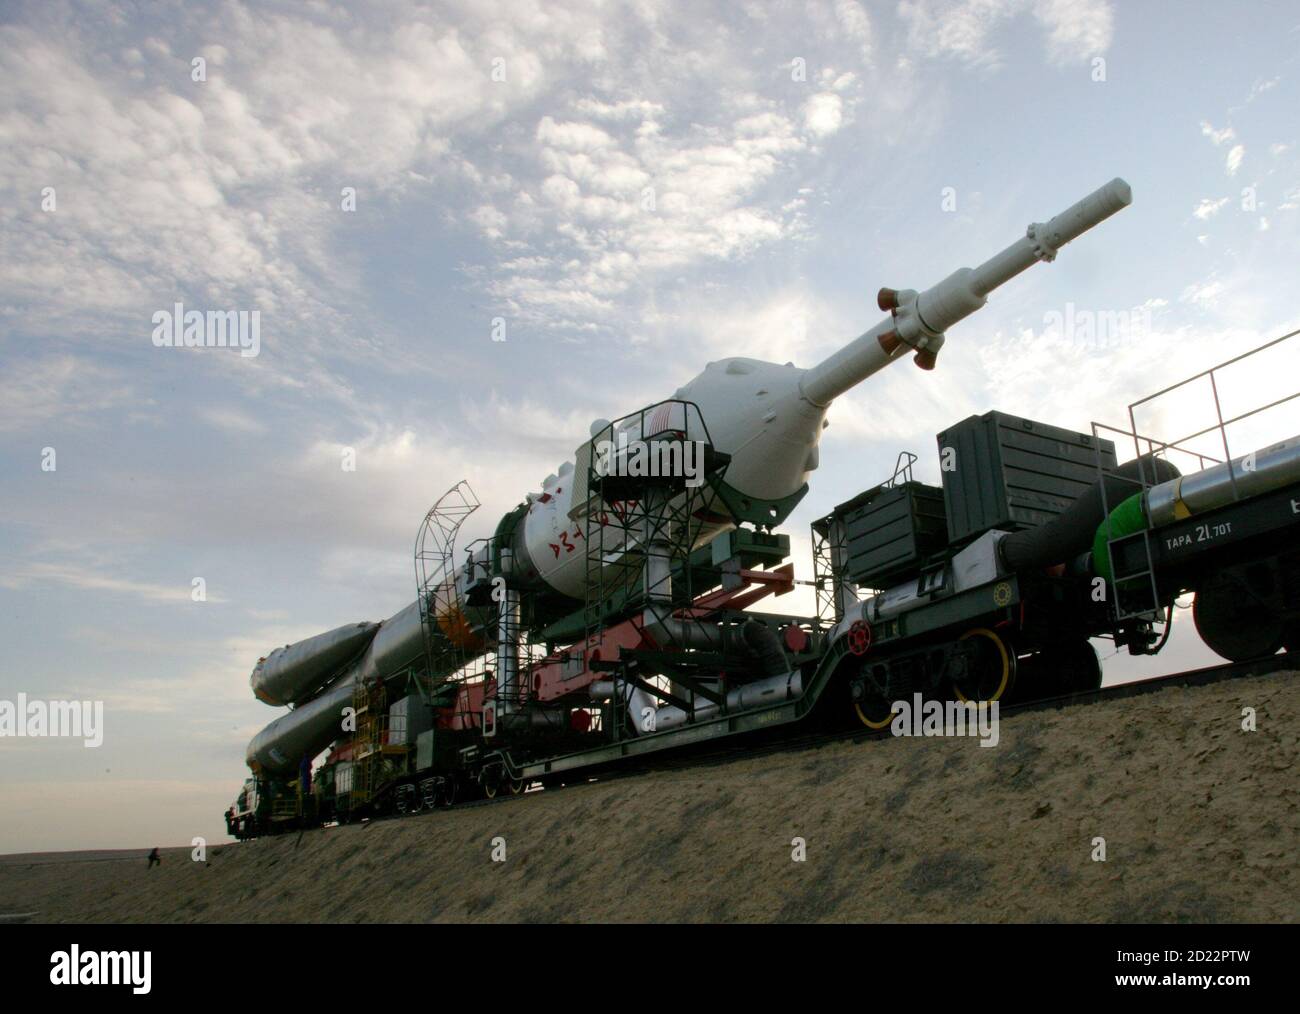 The Russian Soyuz TMA-9 spacecraft is transported to its launch pad at Baikonur cosmodrome in Kazakhstan September 16, 2006. The spacecraft carrying the ISS-14 crew is scheduled to blast off on Monday. REUTERS/Shamil Zhumatov  (KAZAKHSTAN) Stock Photo